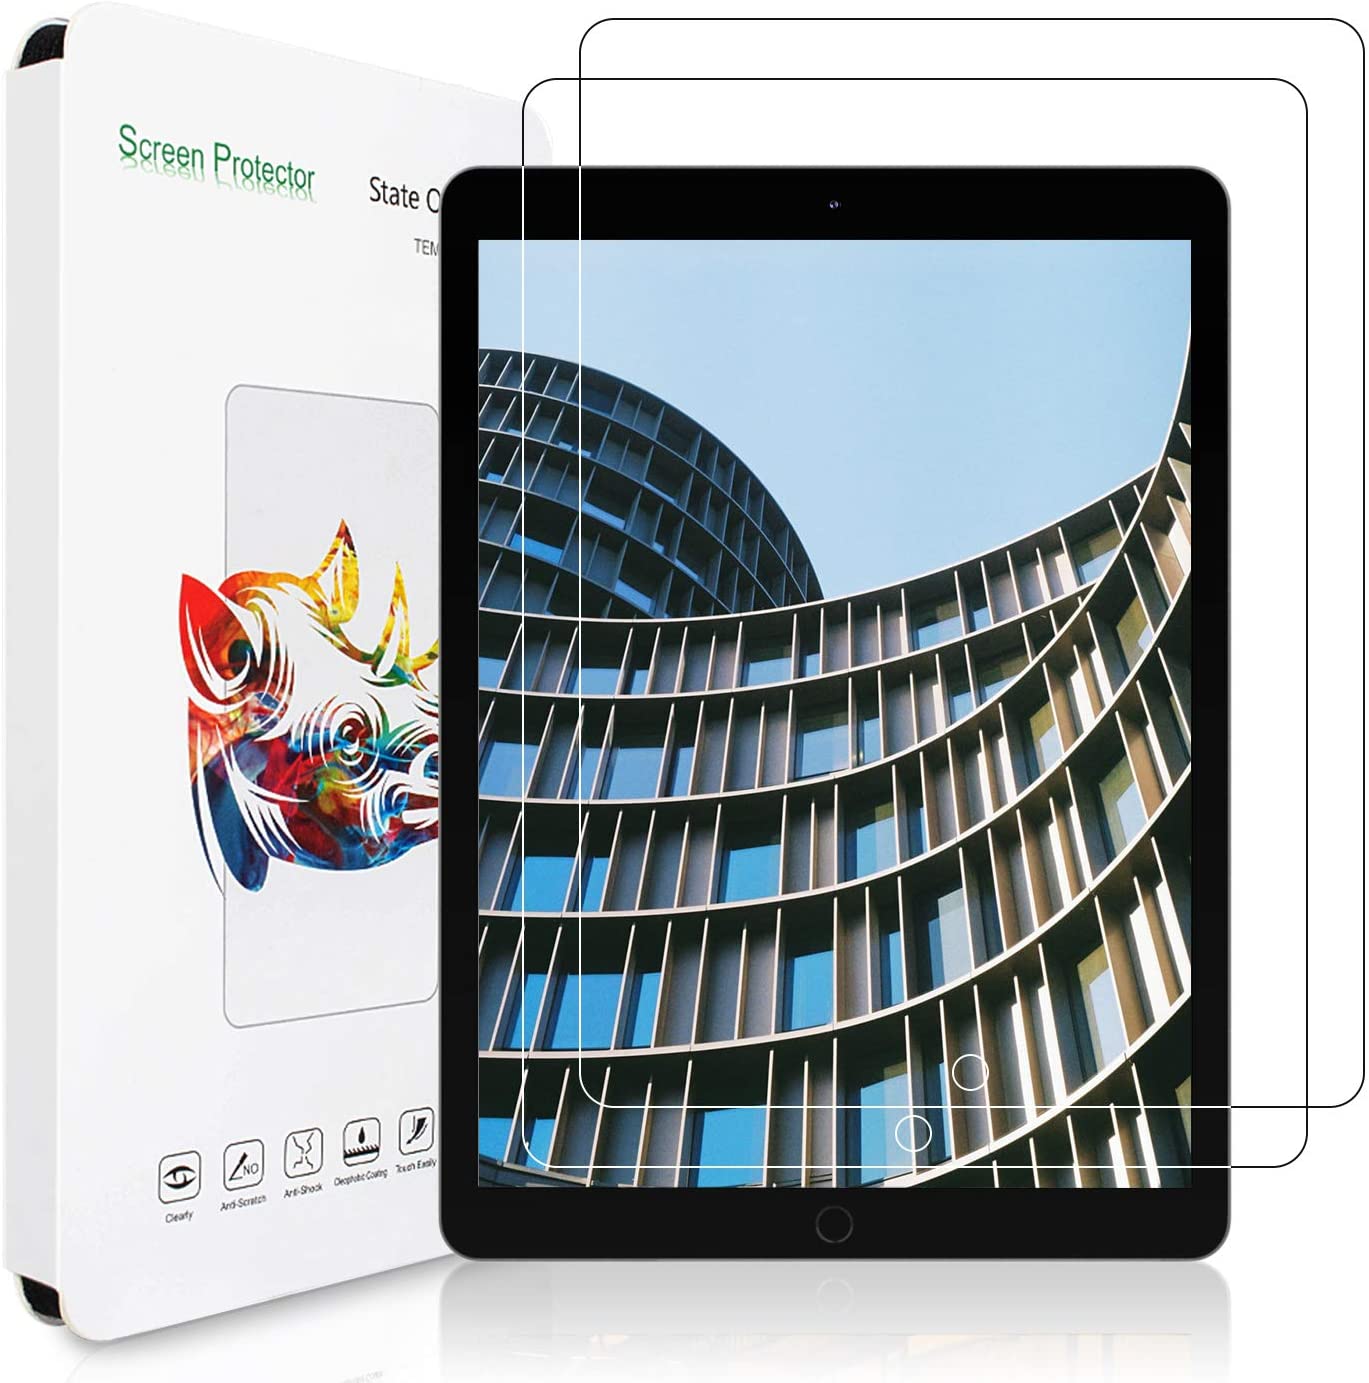 (2 PACK) iPad 9.7" Tempered Glass Screen Protector,Compatible with iPad 6th Generation (9.7 inch, 2018 / 2017) - e4cents